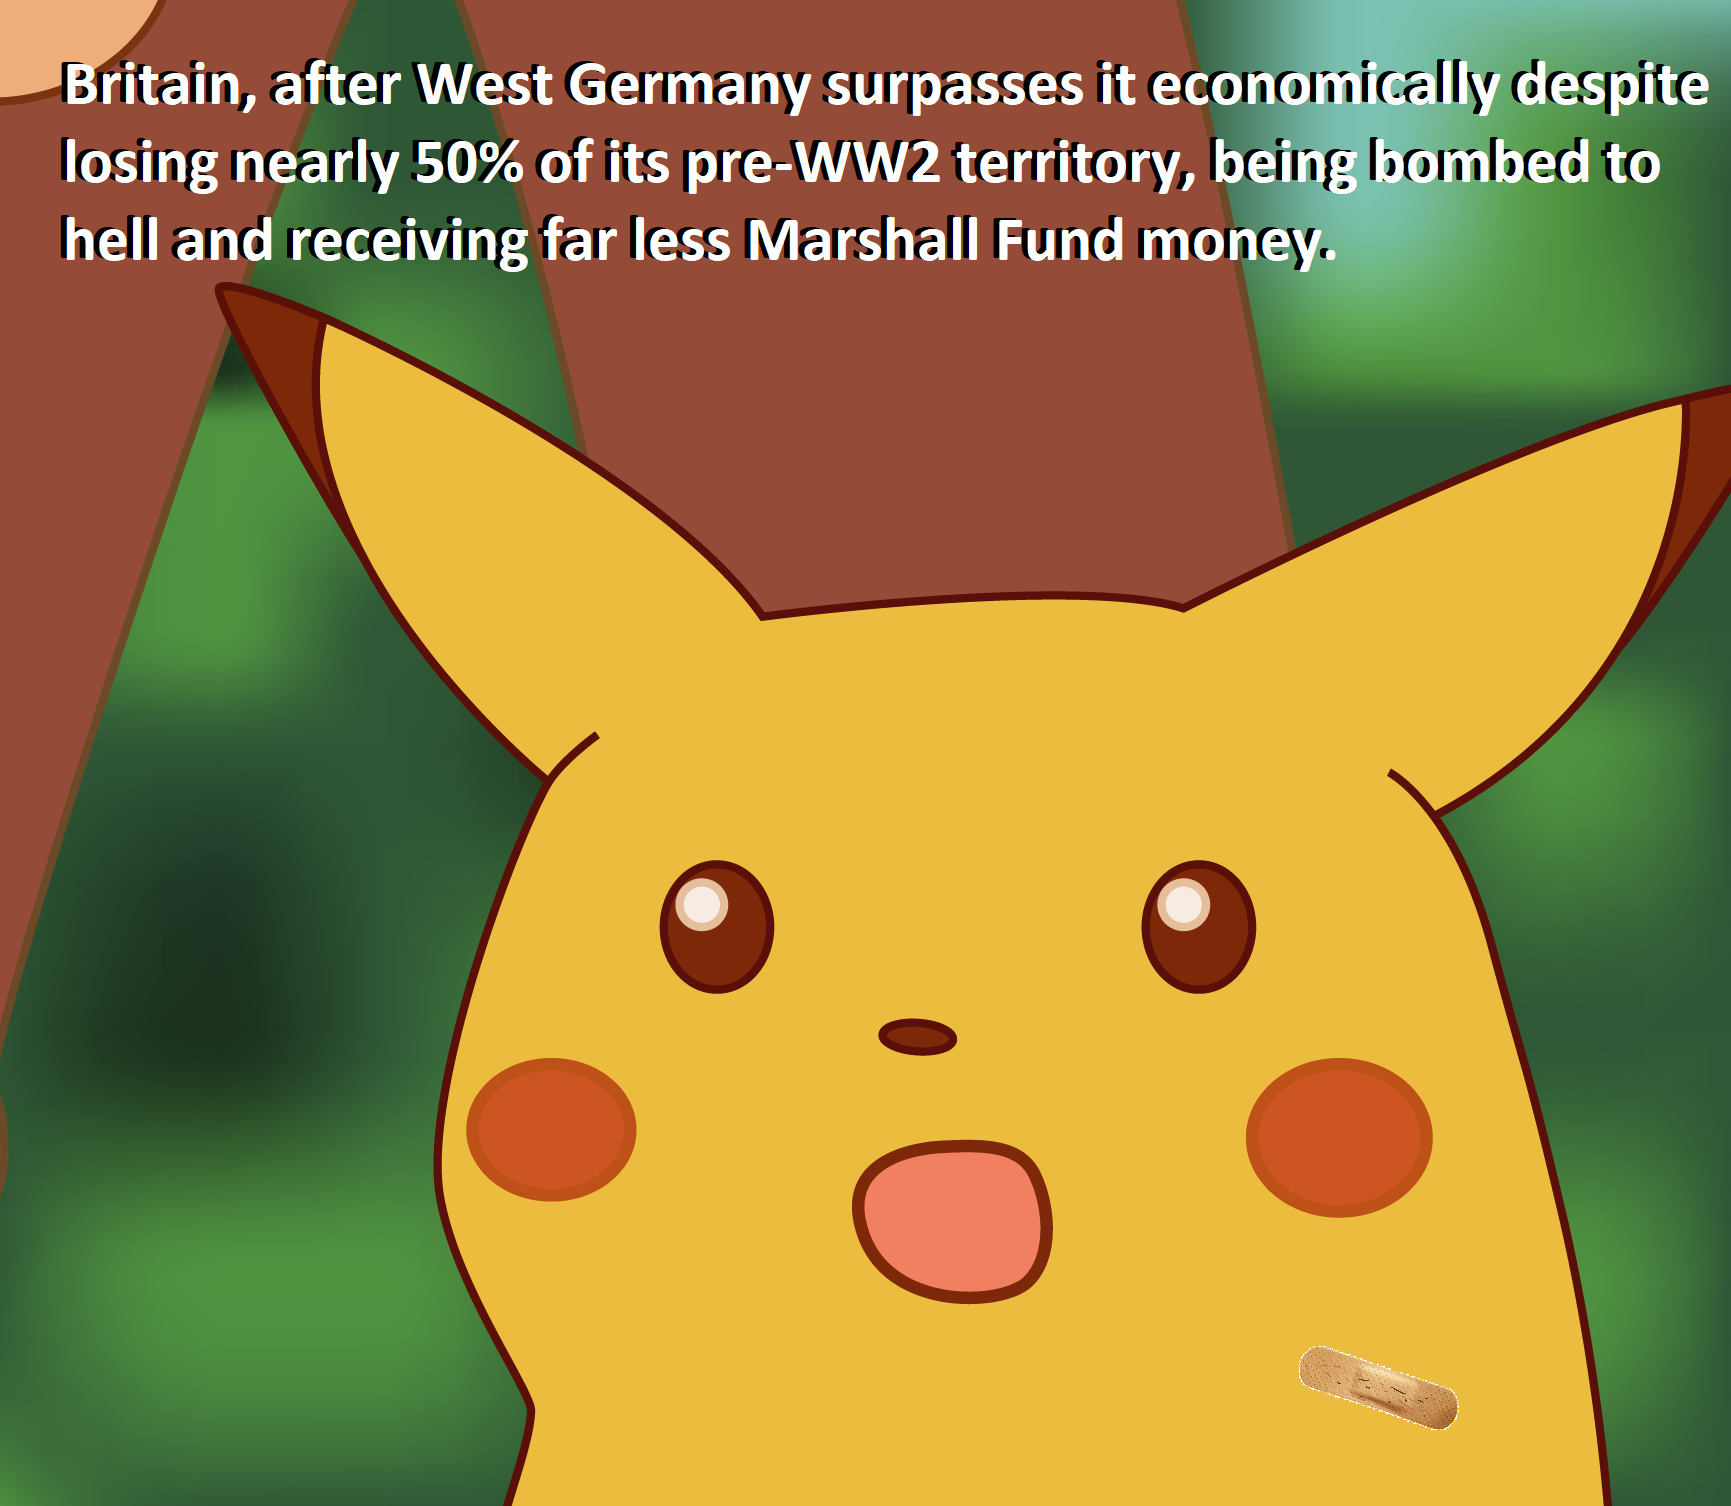 When Germany keeps rebuilding its economy after losing world wars